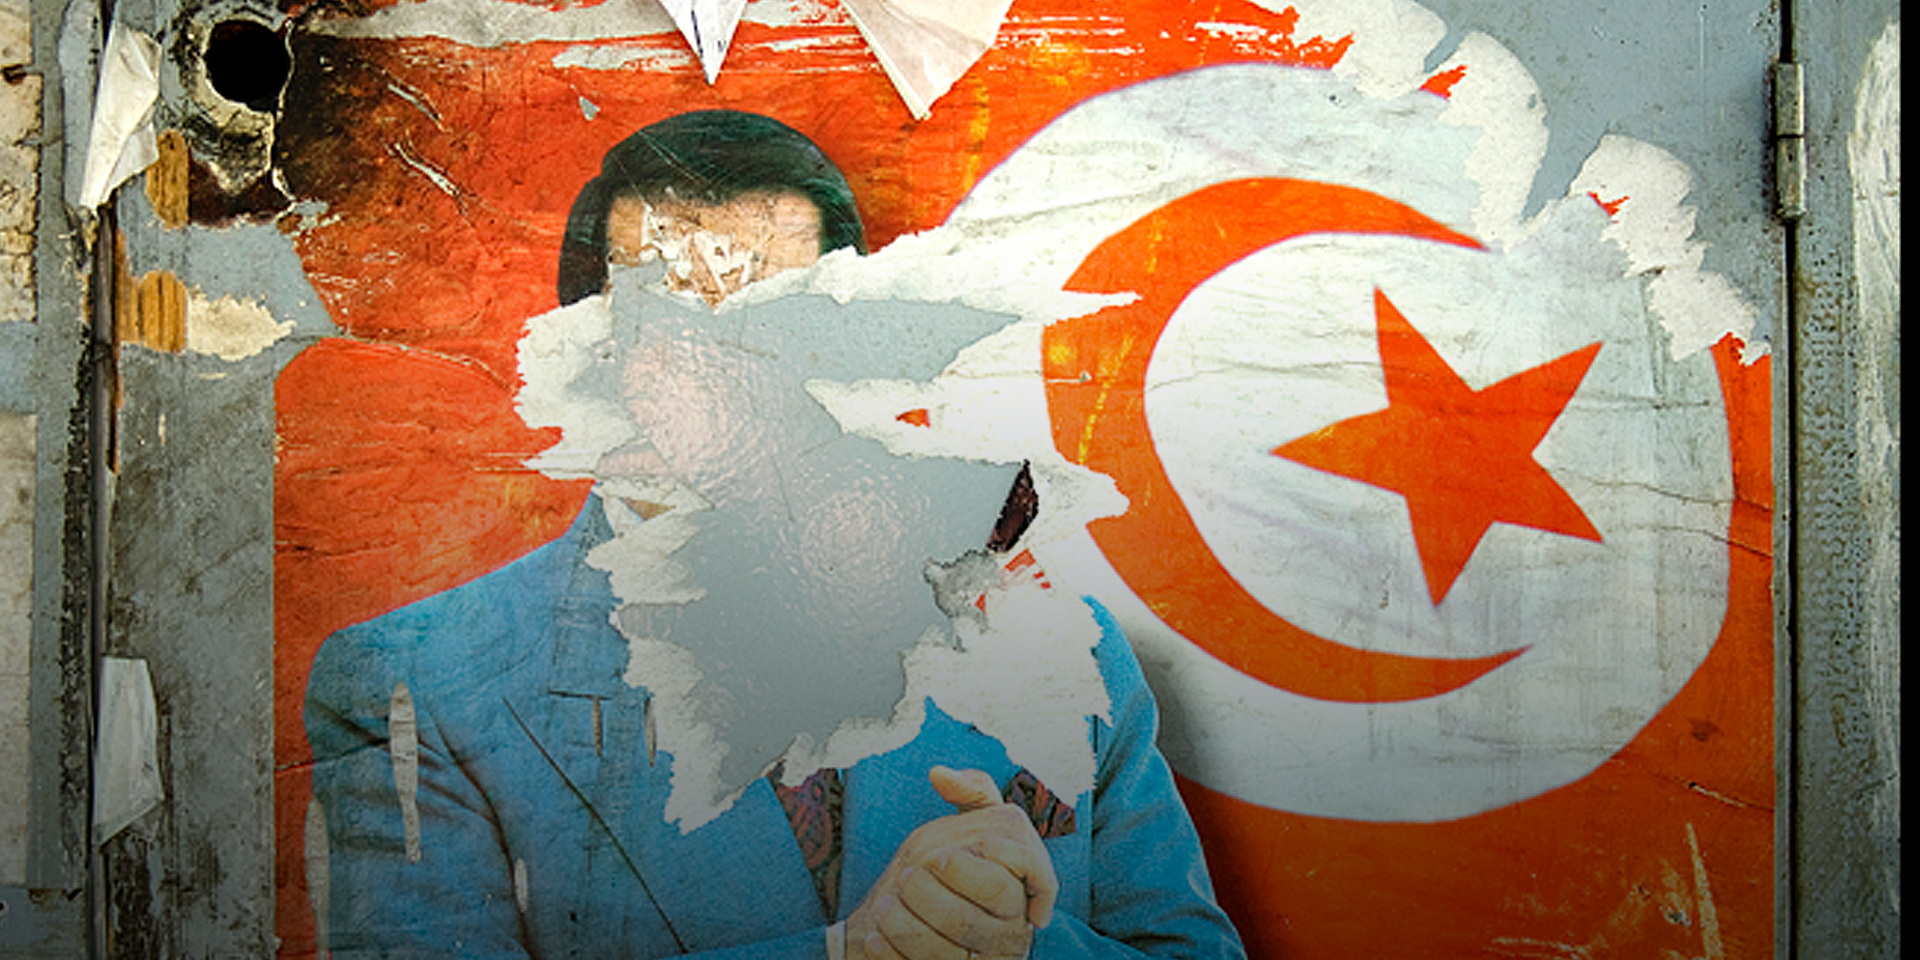 A defaced political mural showing the face of a politician ripped down and the Tunisian flag in the background.